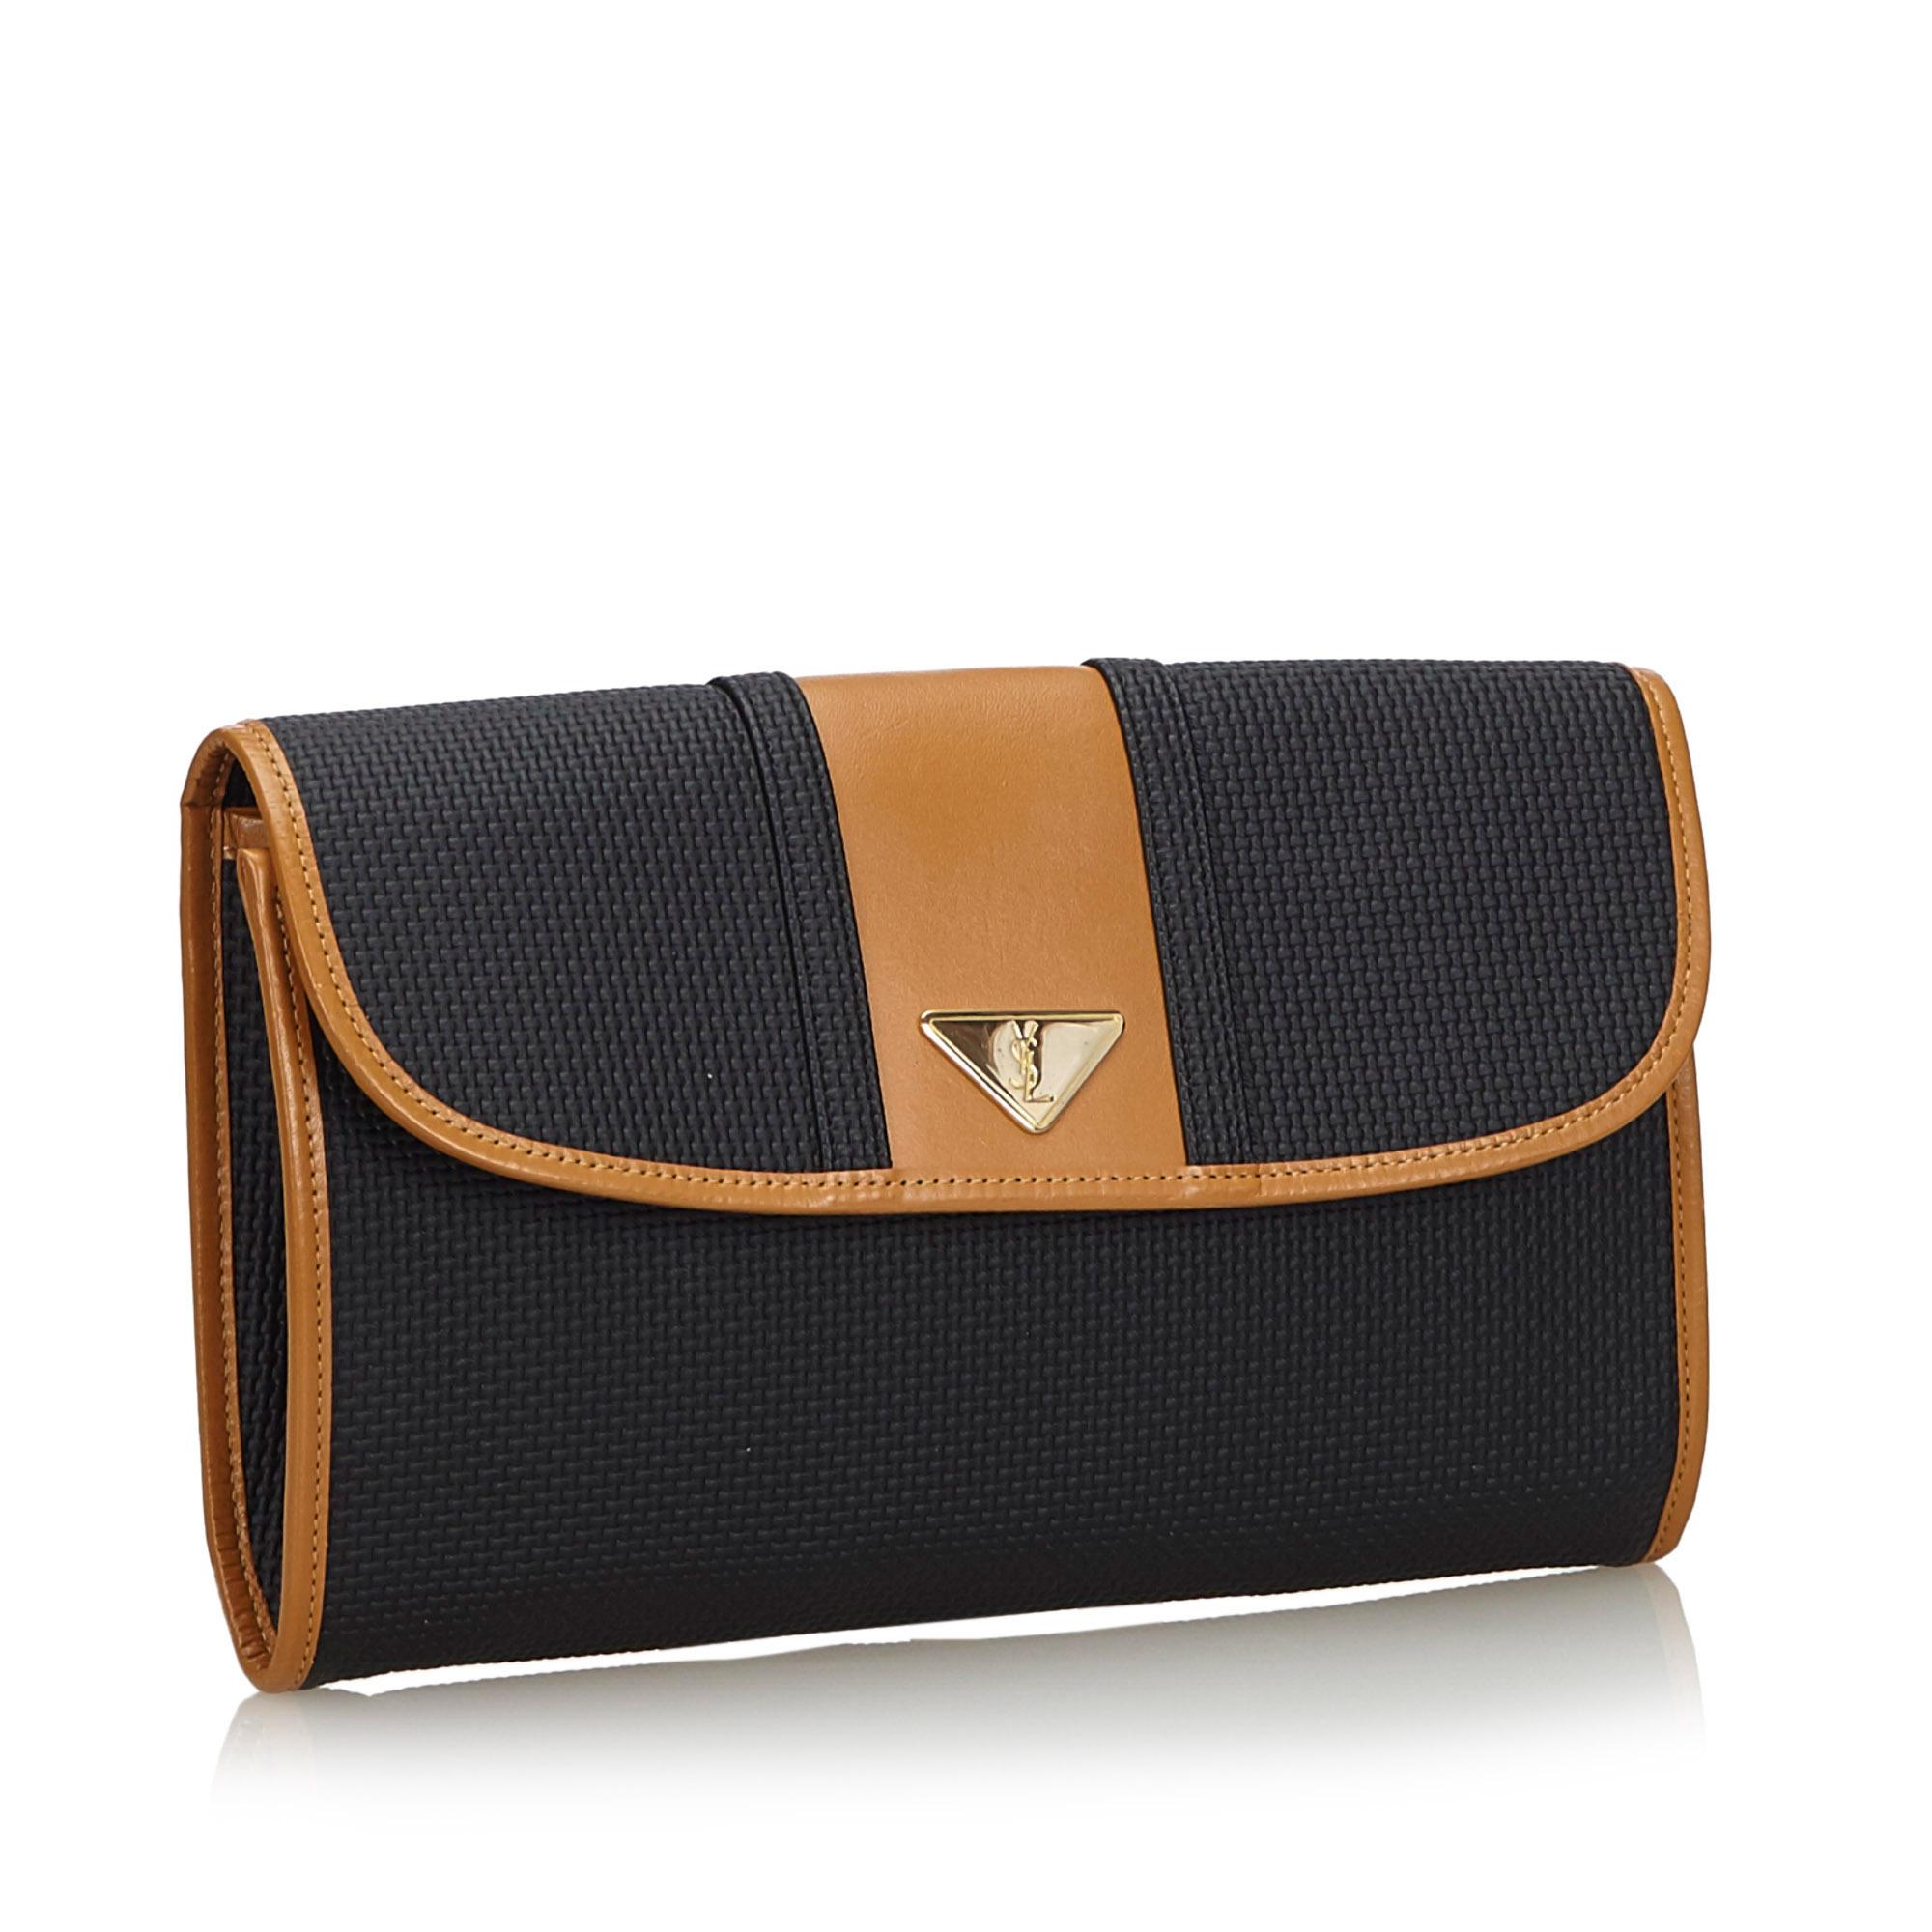 This clutch bag features a PVC body with leather trim, a front flap with magnetic closure, and interior zip and slip pockets. It carries as AB condition rating.

Inclusions: 
This item does not come with inclusions.

Dimensions:
Length: 18.00